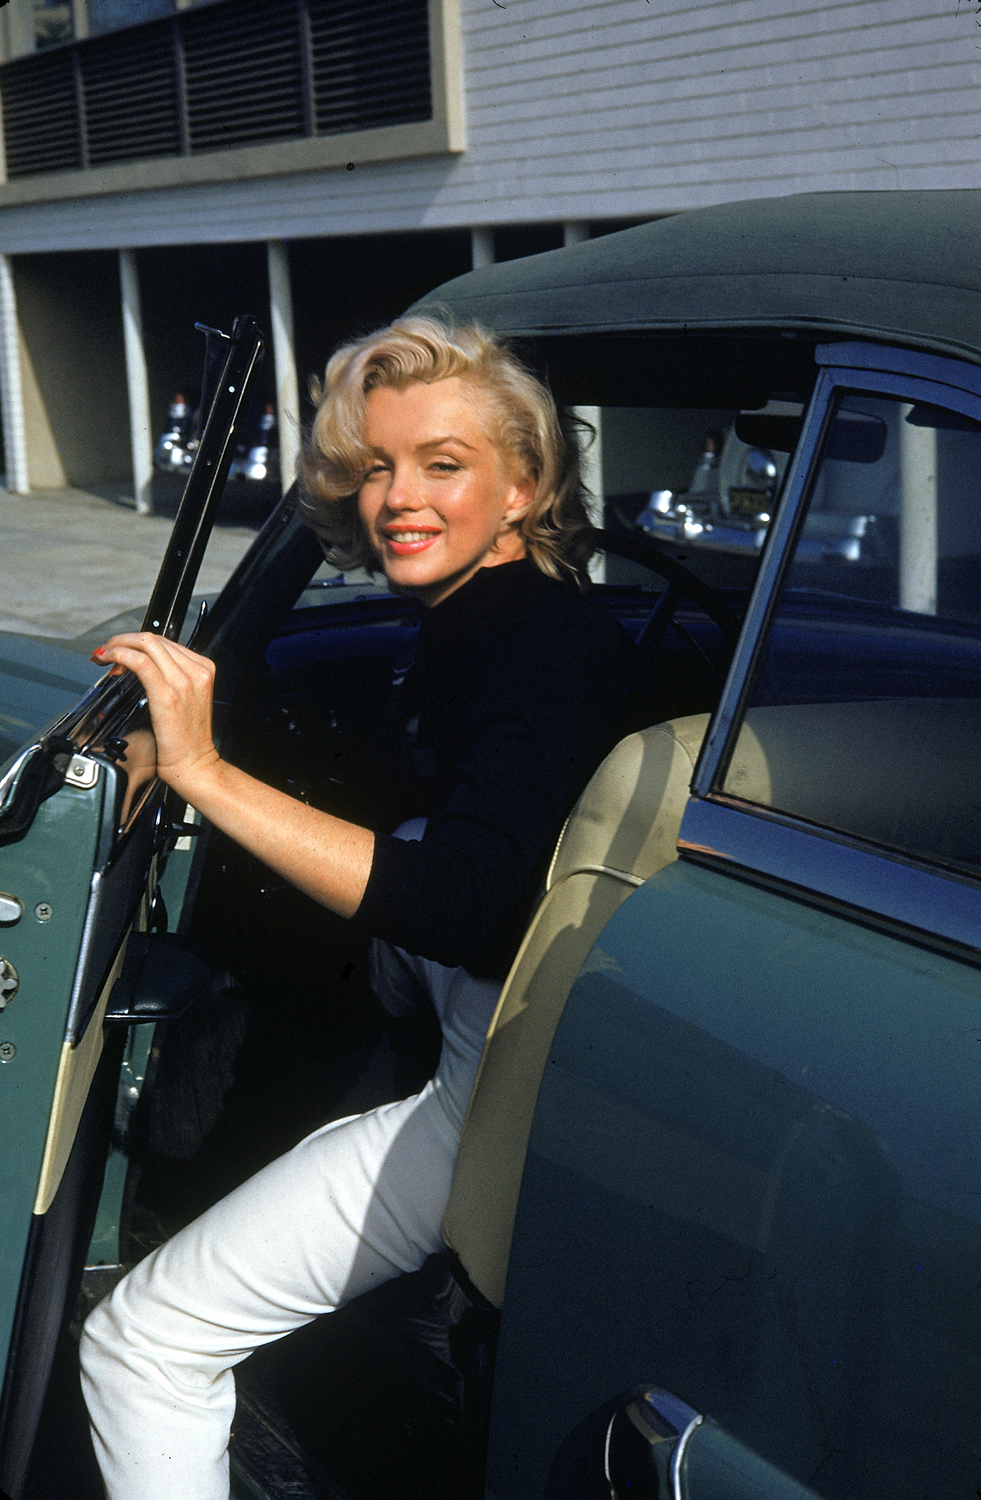 Marilyn Monroe getting out of a car.